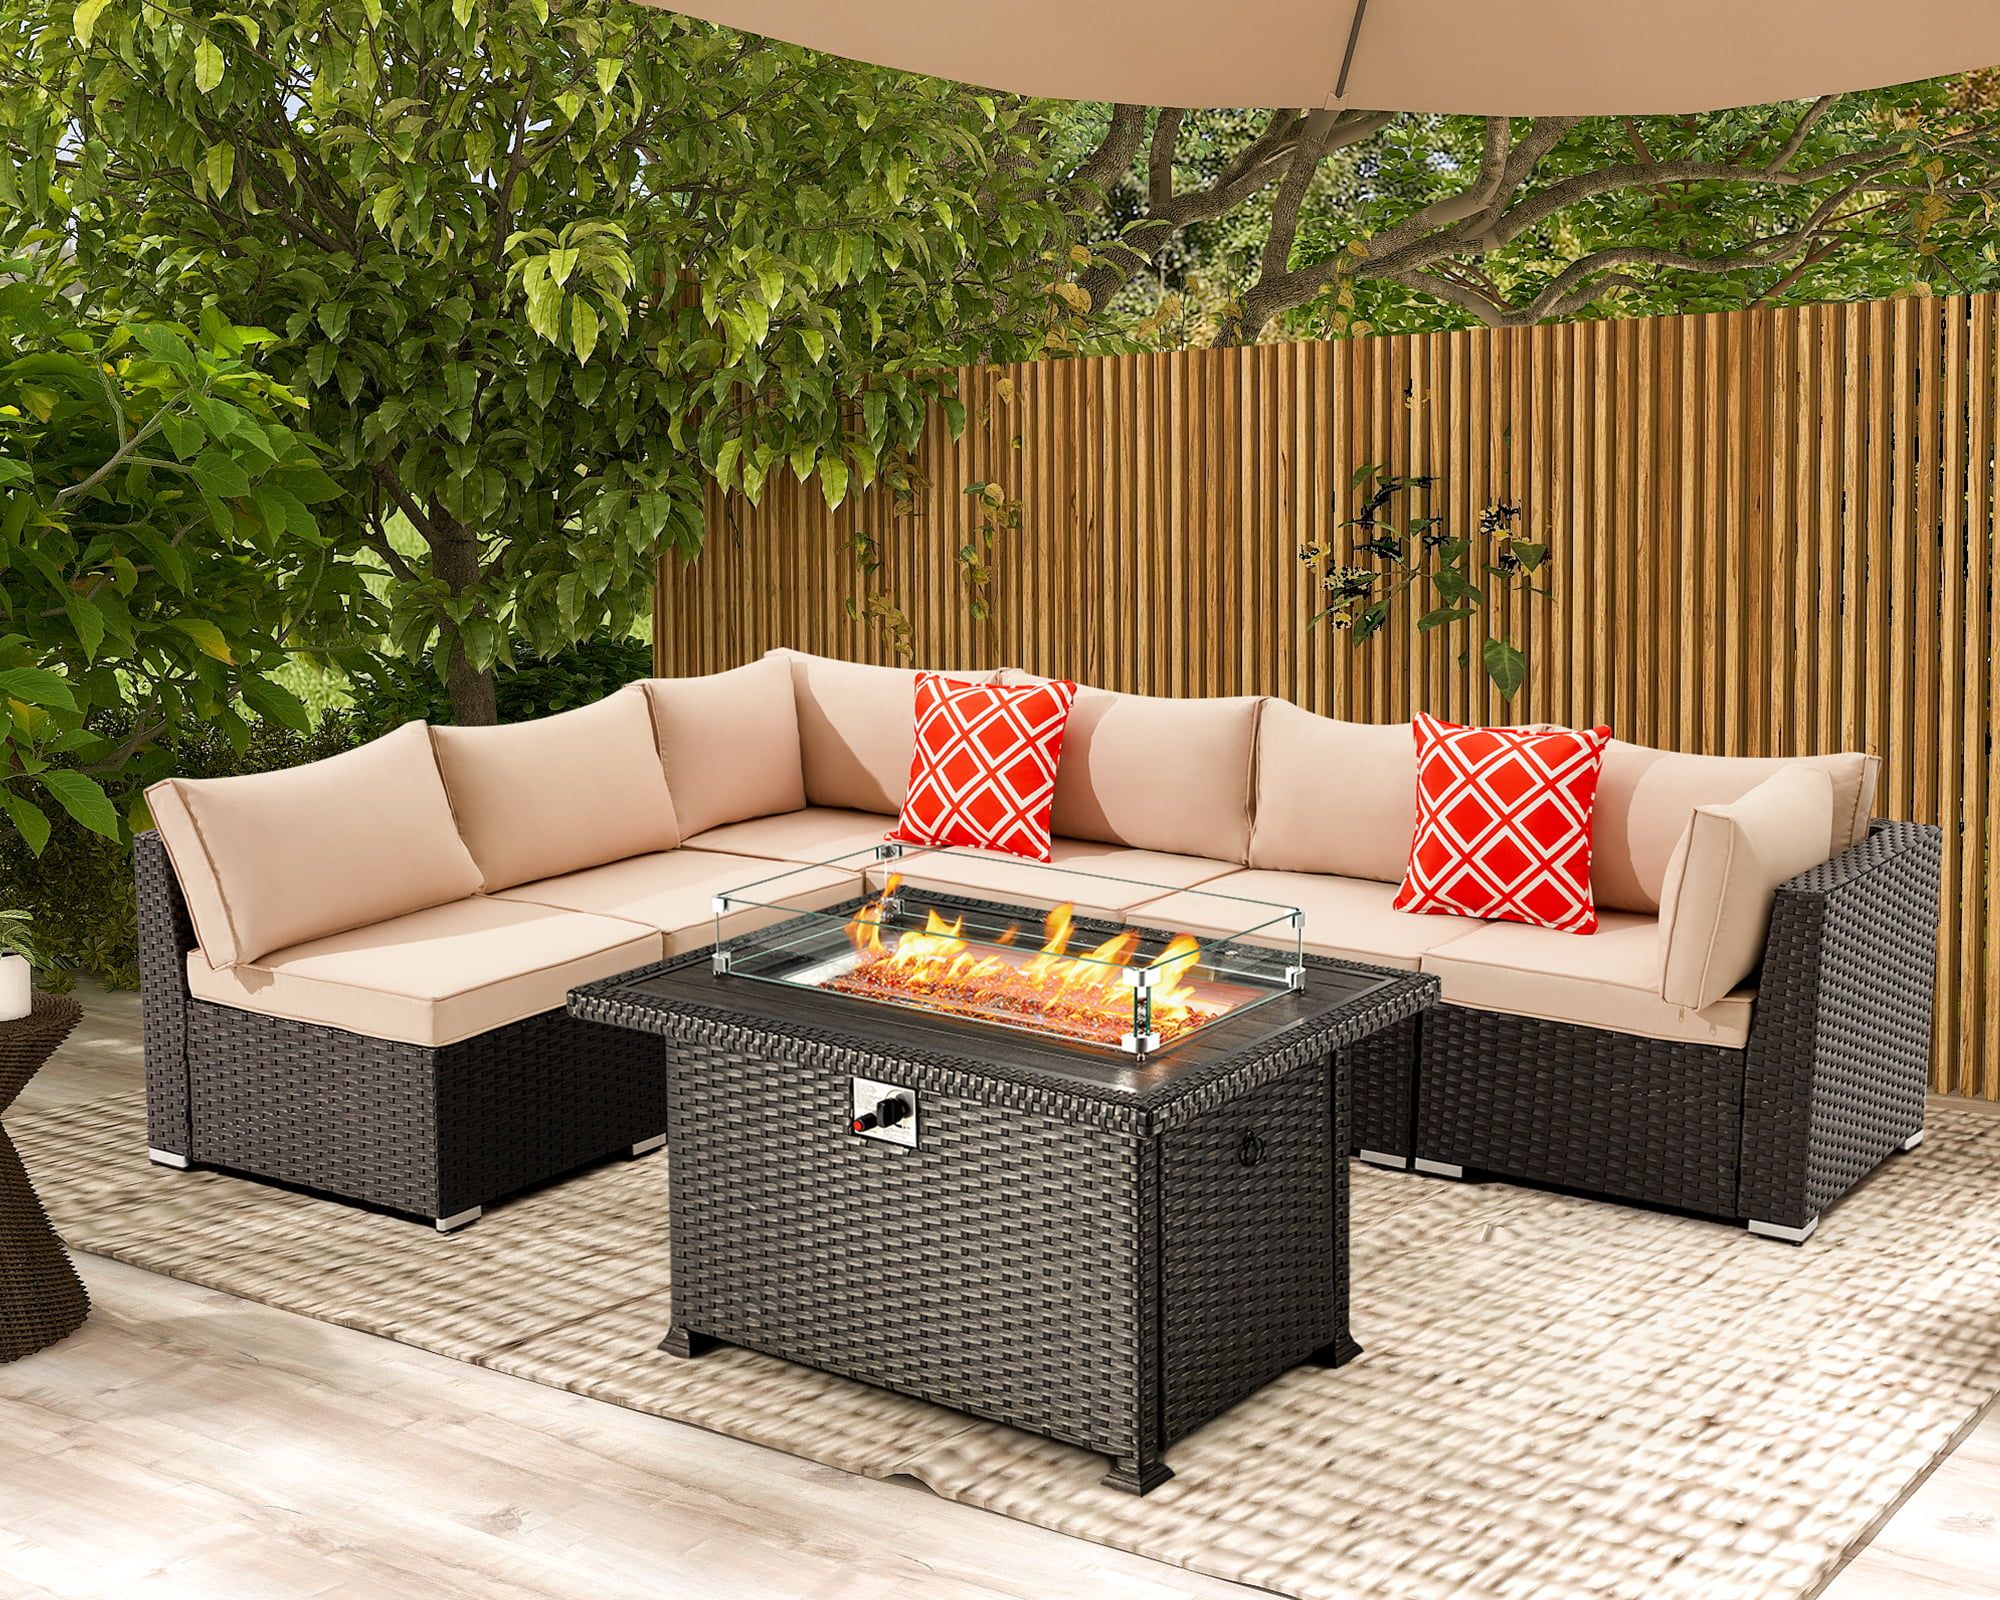 Hugiee 7 Pieces Patio Furniture Wicker Sofa Outdoor Sectional Sets With  44 Inch 50,000 Btu Gas Fire Pit Table Auto Ignition Propane Fire Pit Table,  Khaki – Walmart Regarding Fire Pit Table Wicker Sectional Sofa Set (Photo 1 of 15)